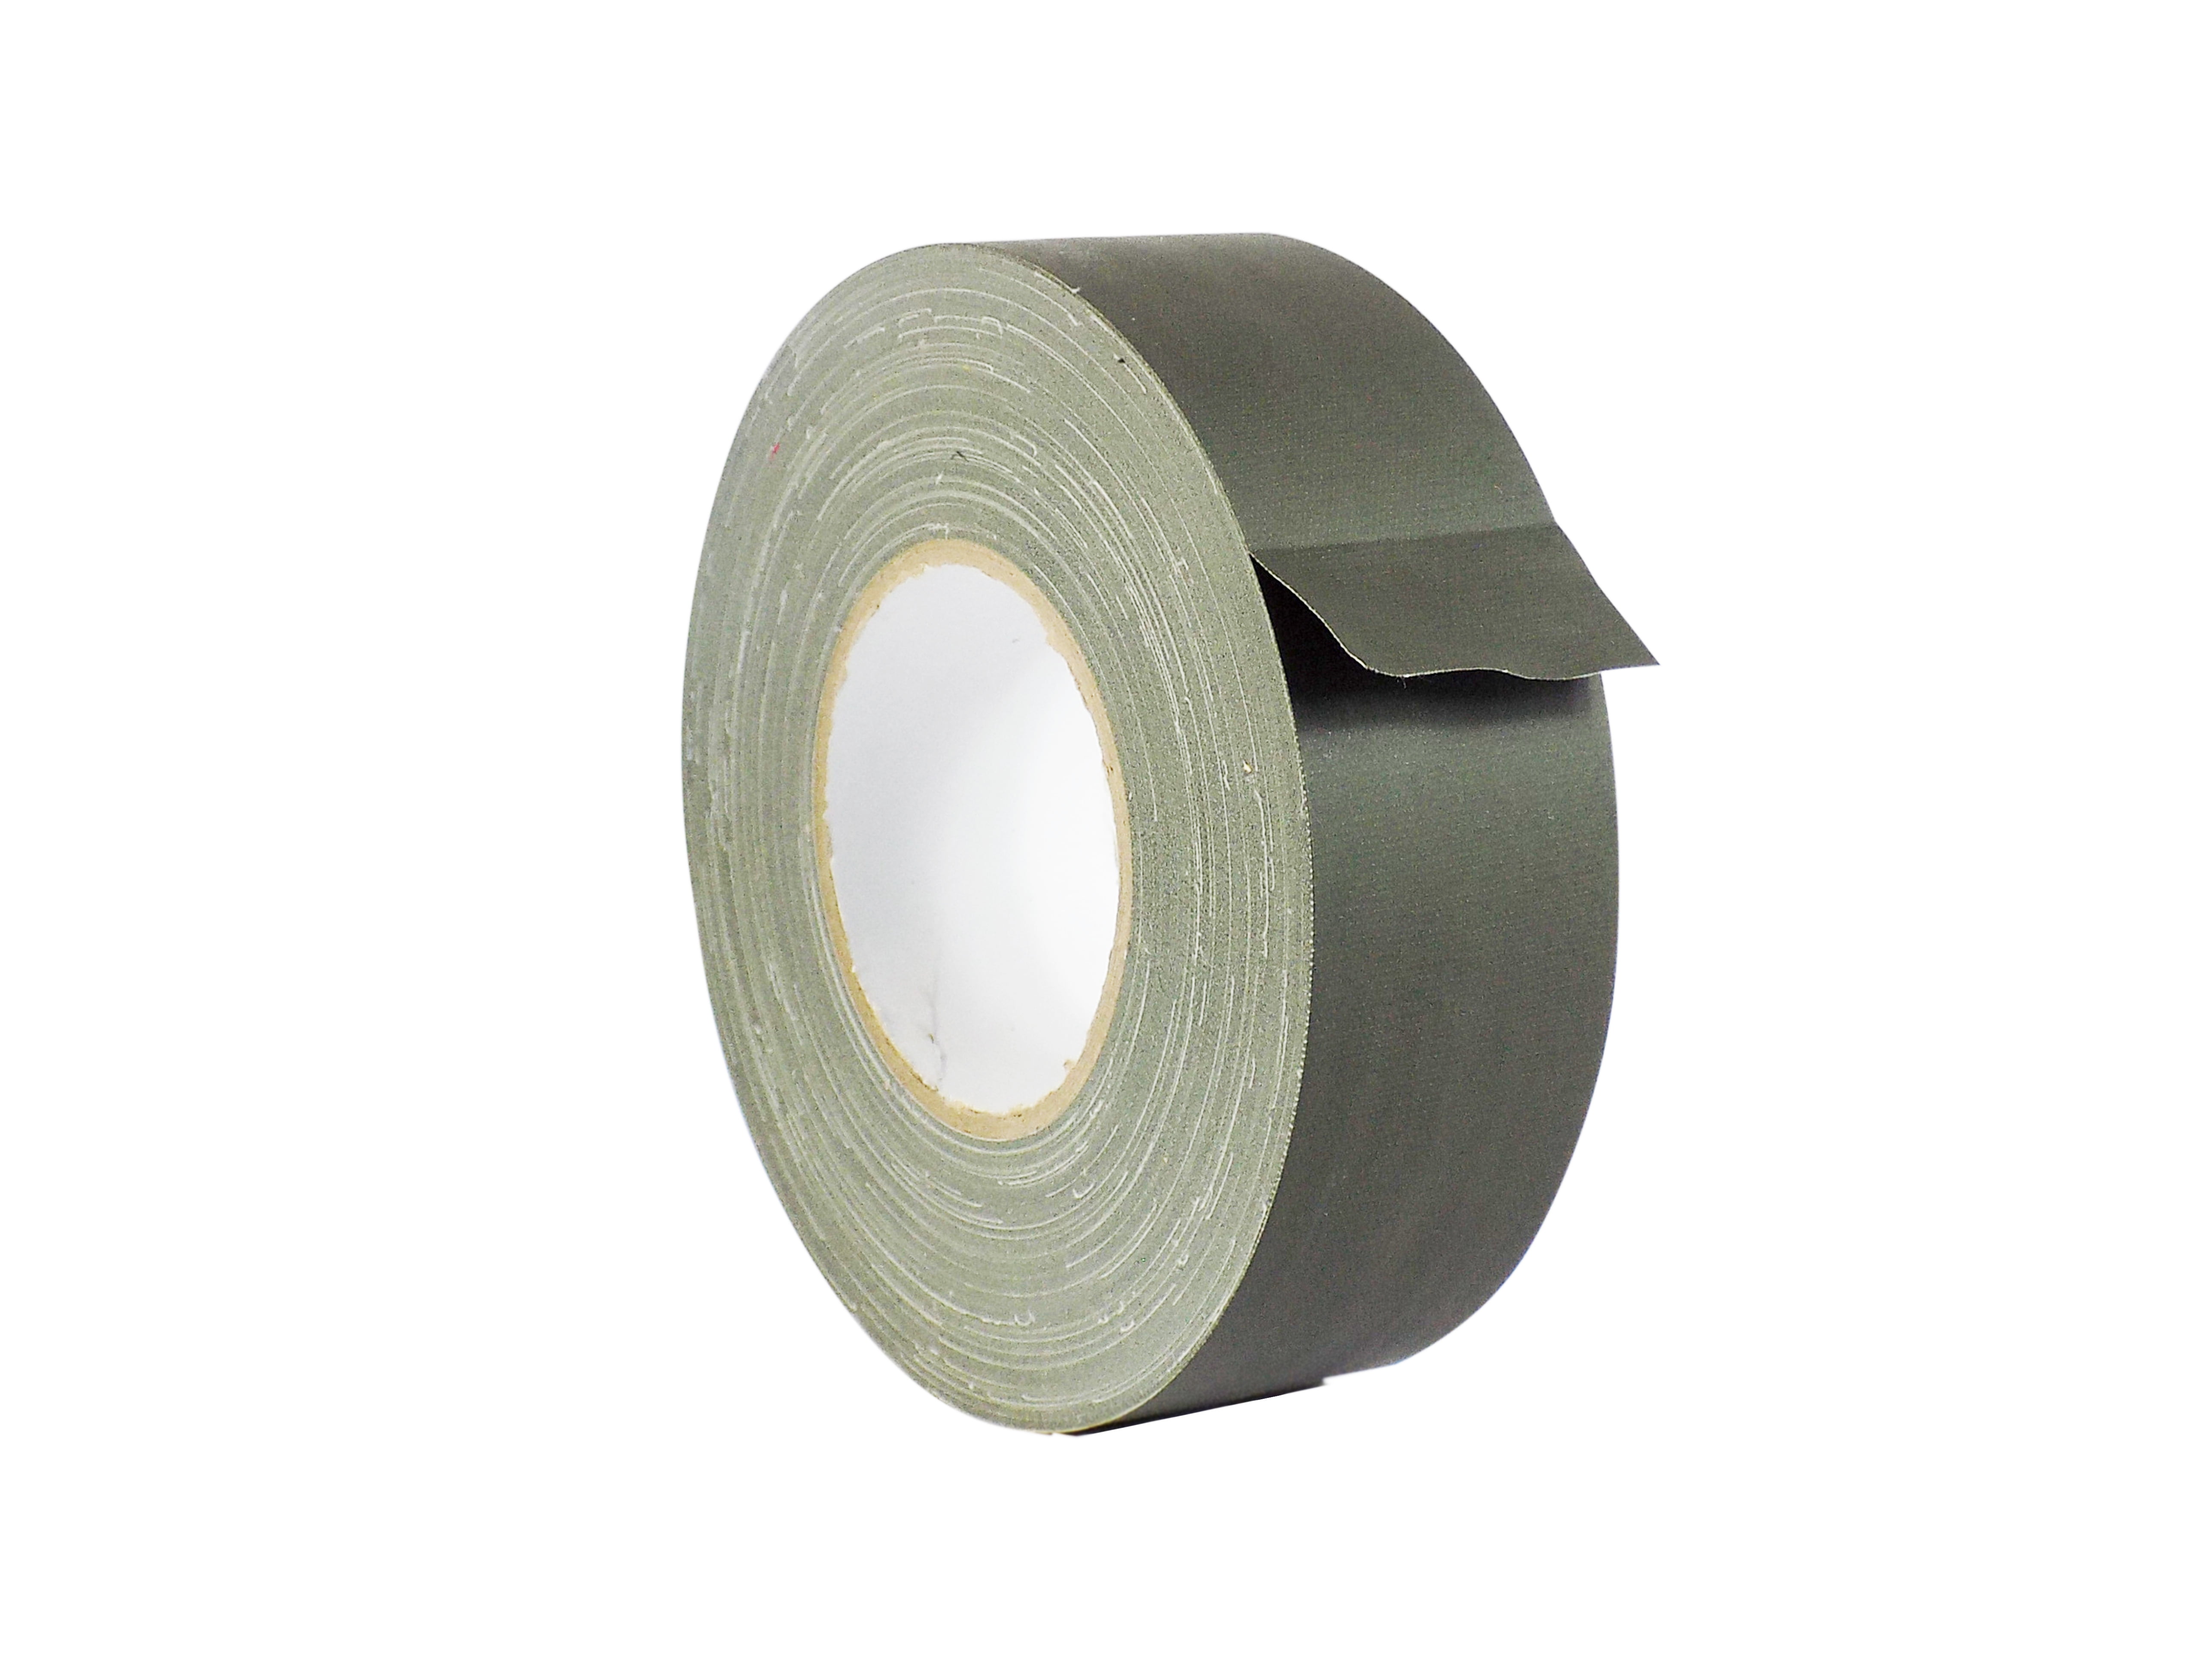 ProTapes Pro Duct Burgundy 3 x 60 yds Heavy-Duty Duct Tape 16 Rolls